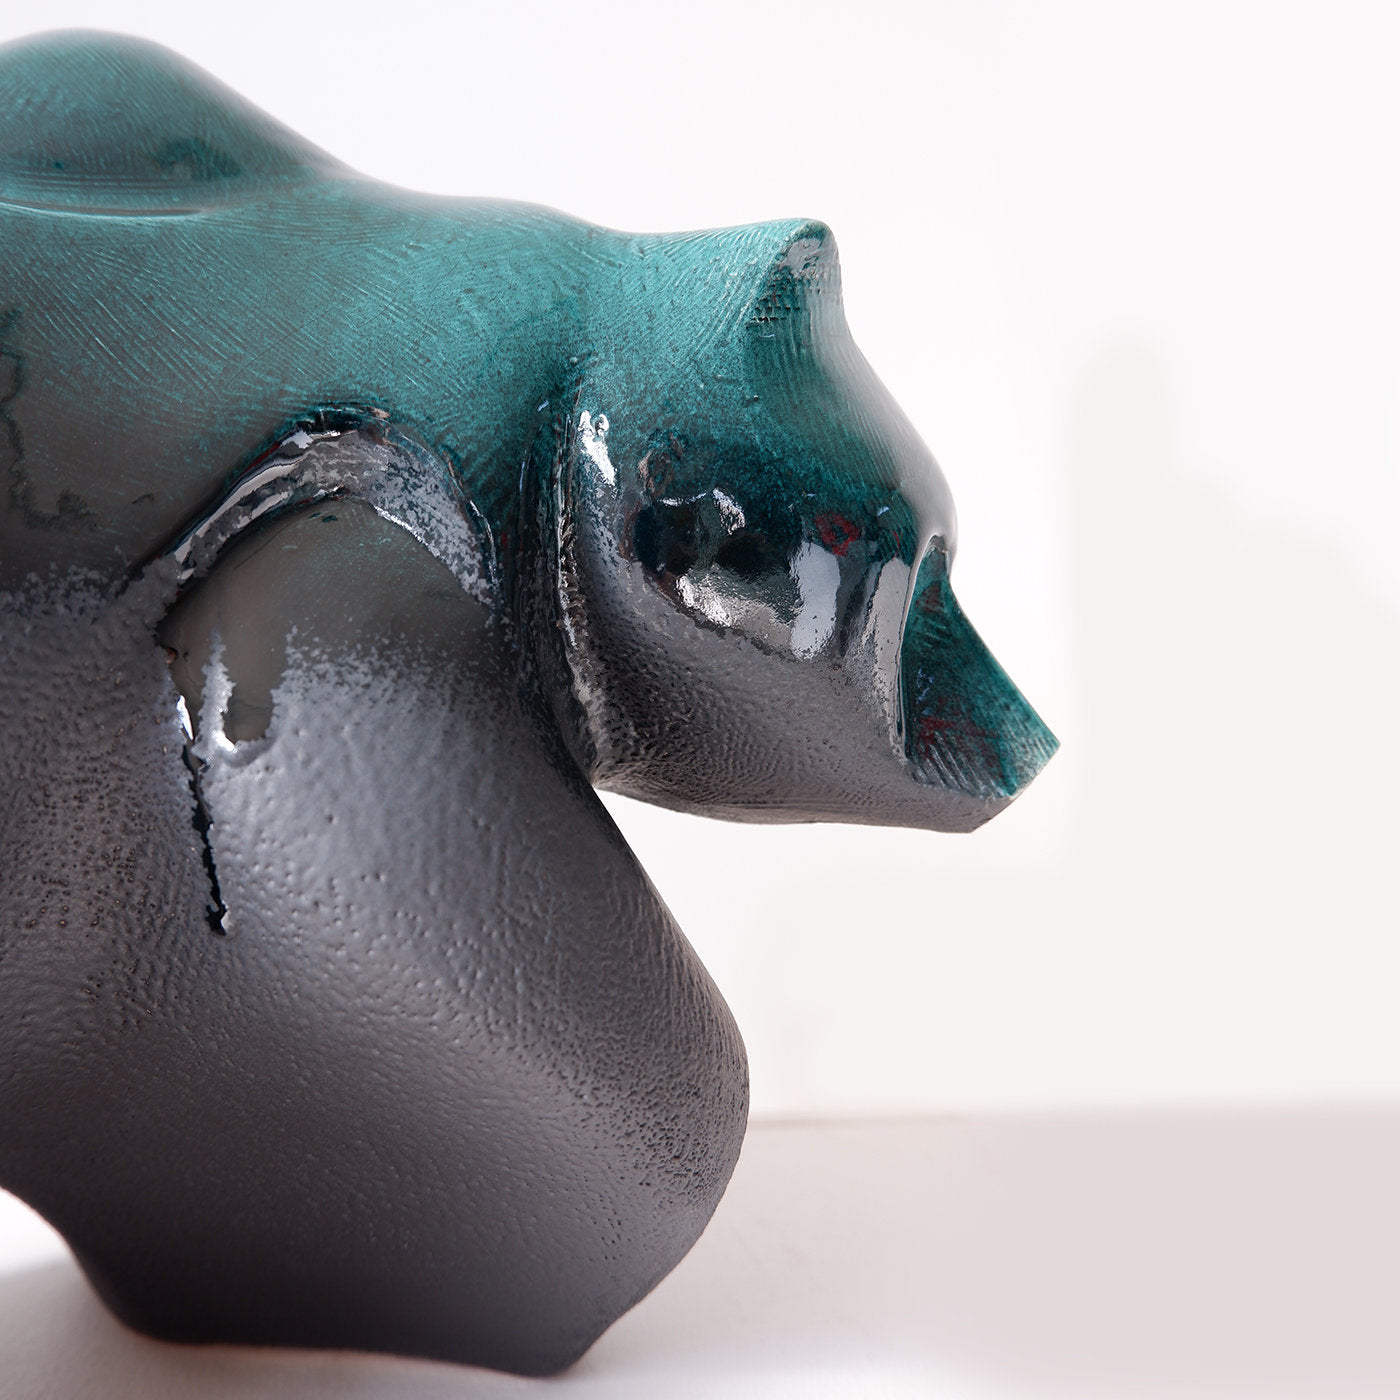 Bear Sculpture in Turquoise - Alternative view 1